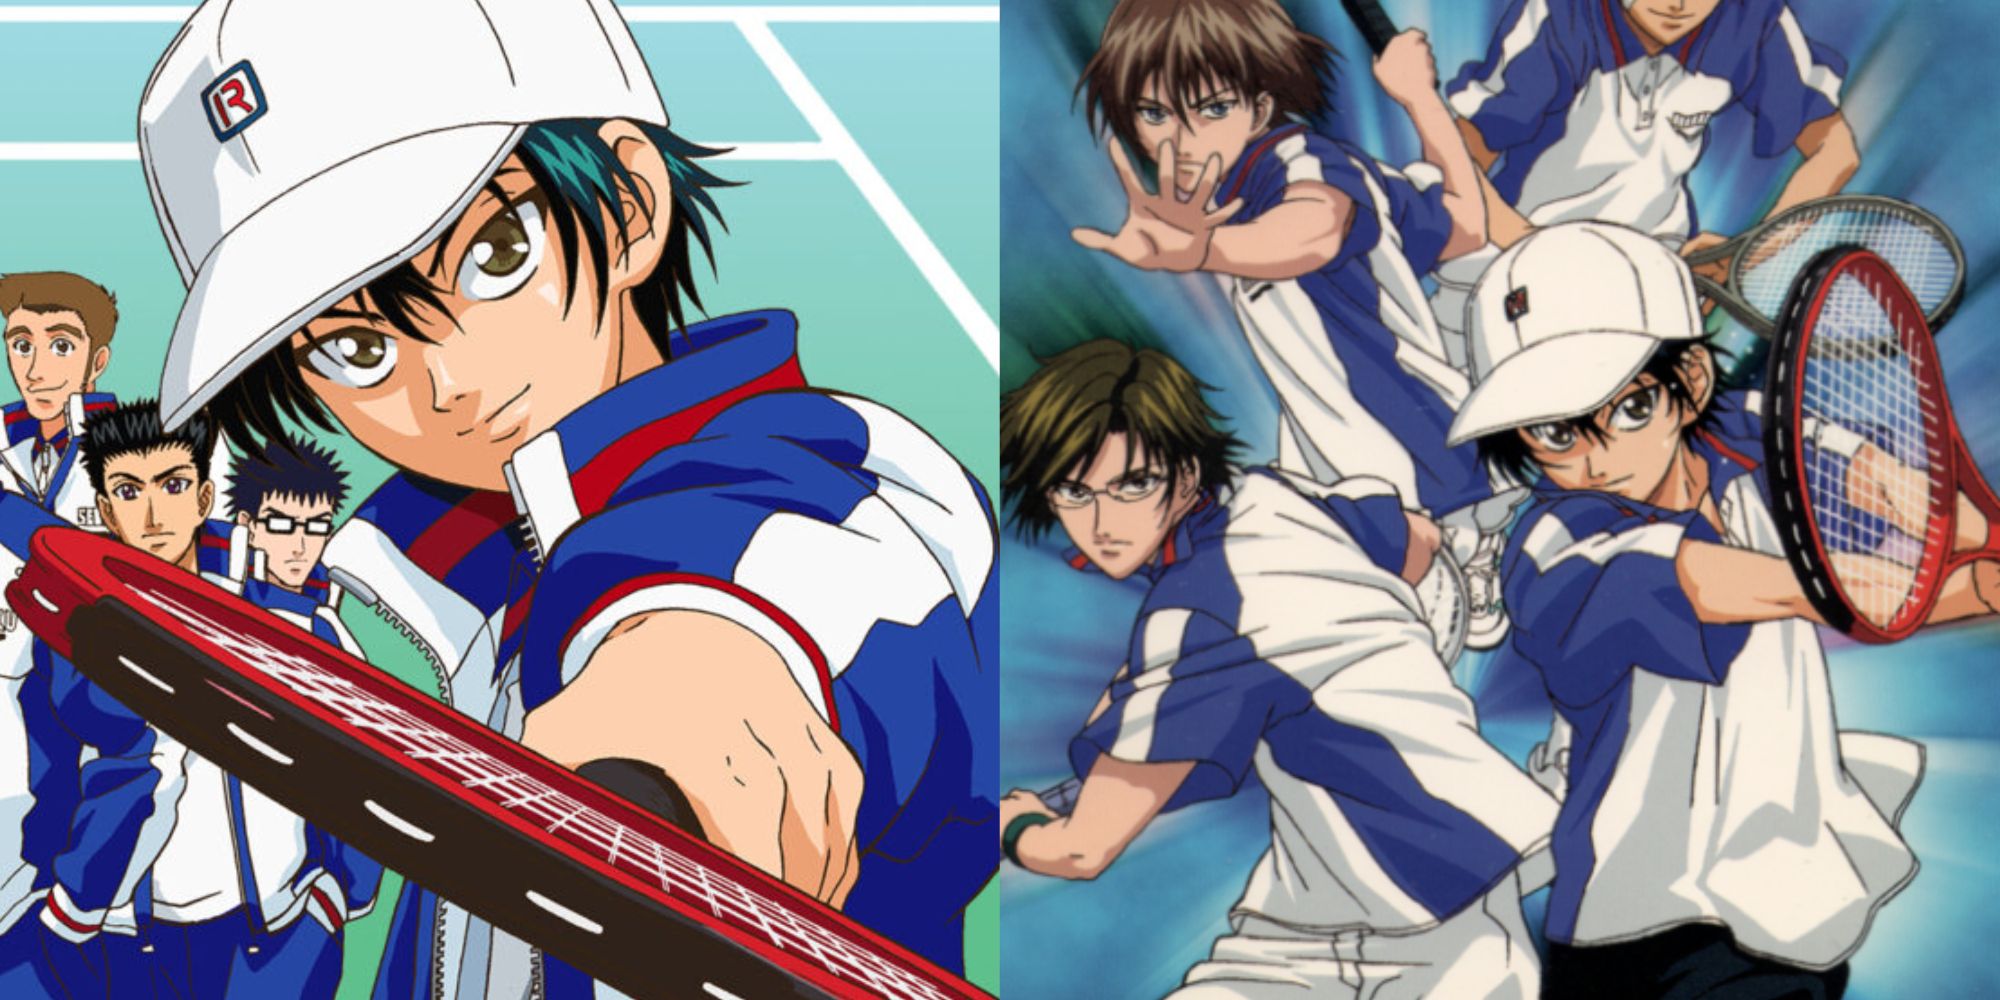 prince of tennis anime key visuals with different members of the cast